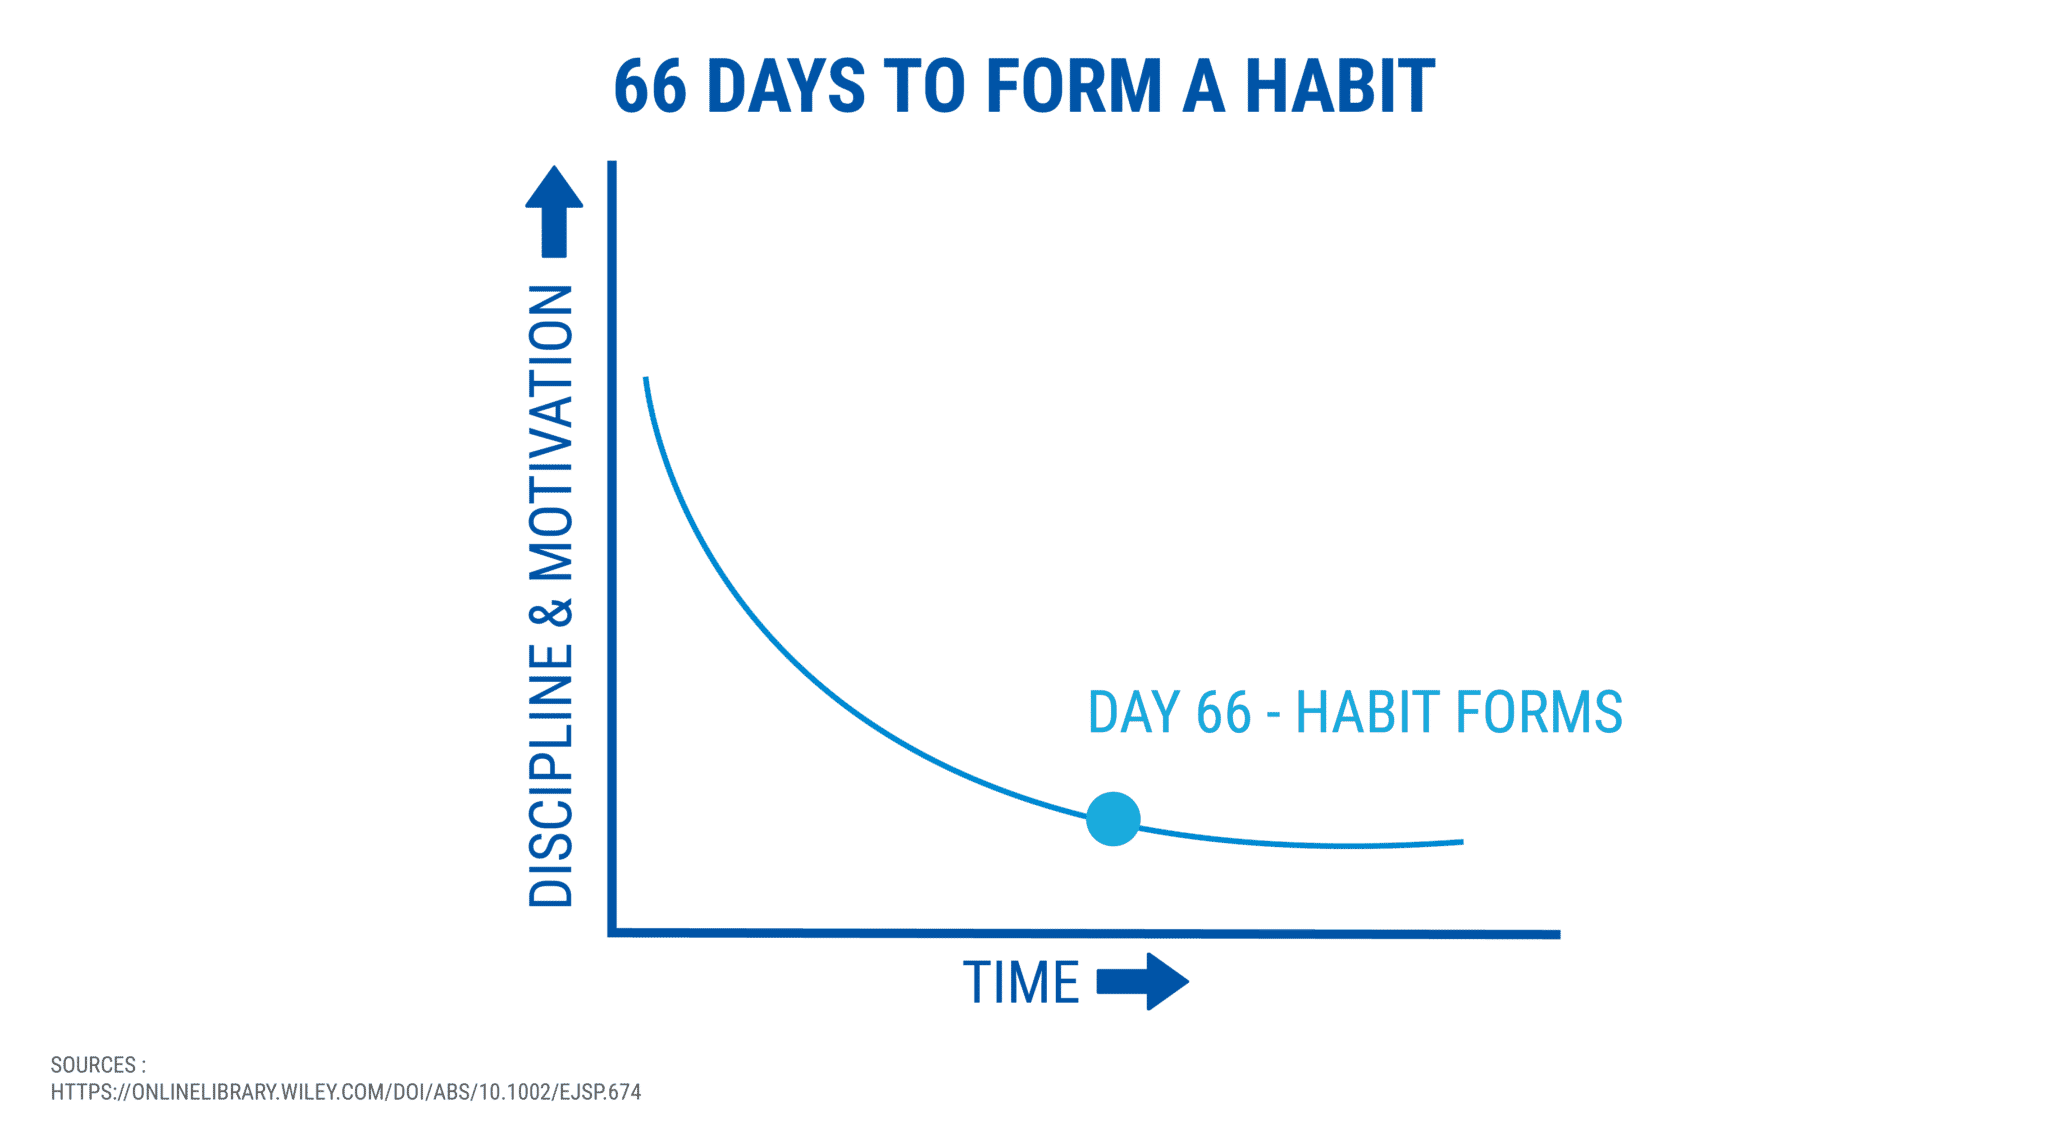 66 days to form a habit - starting a coaching business while working full-time